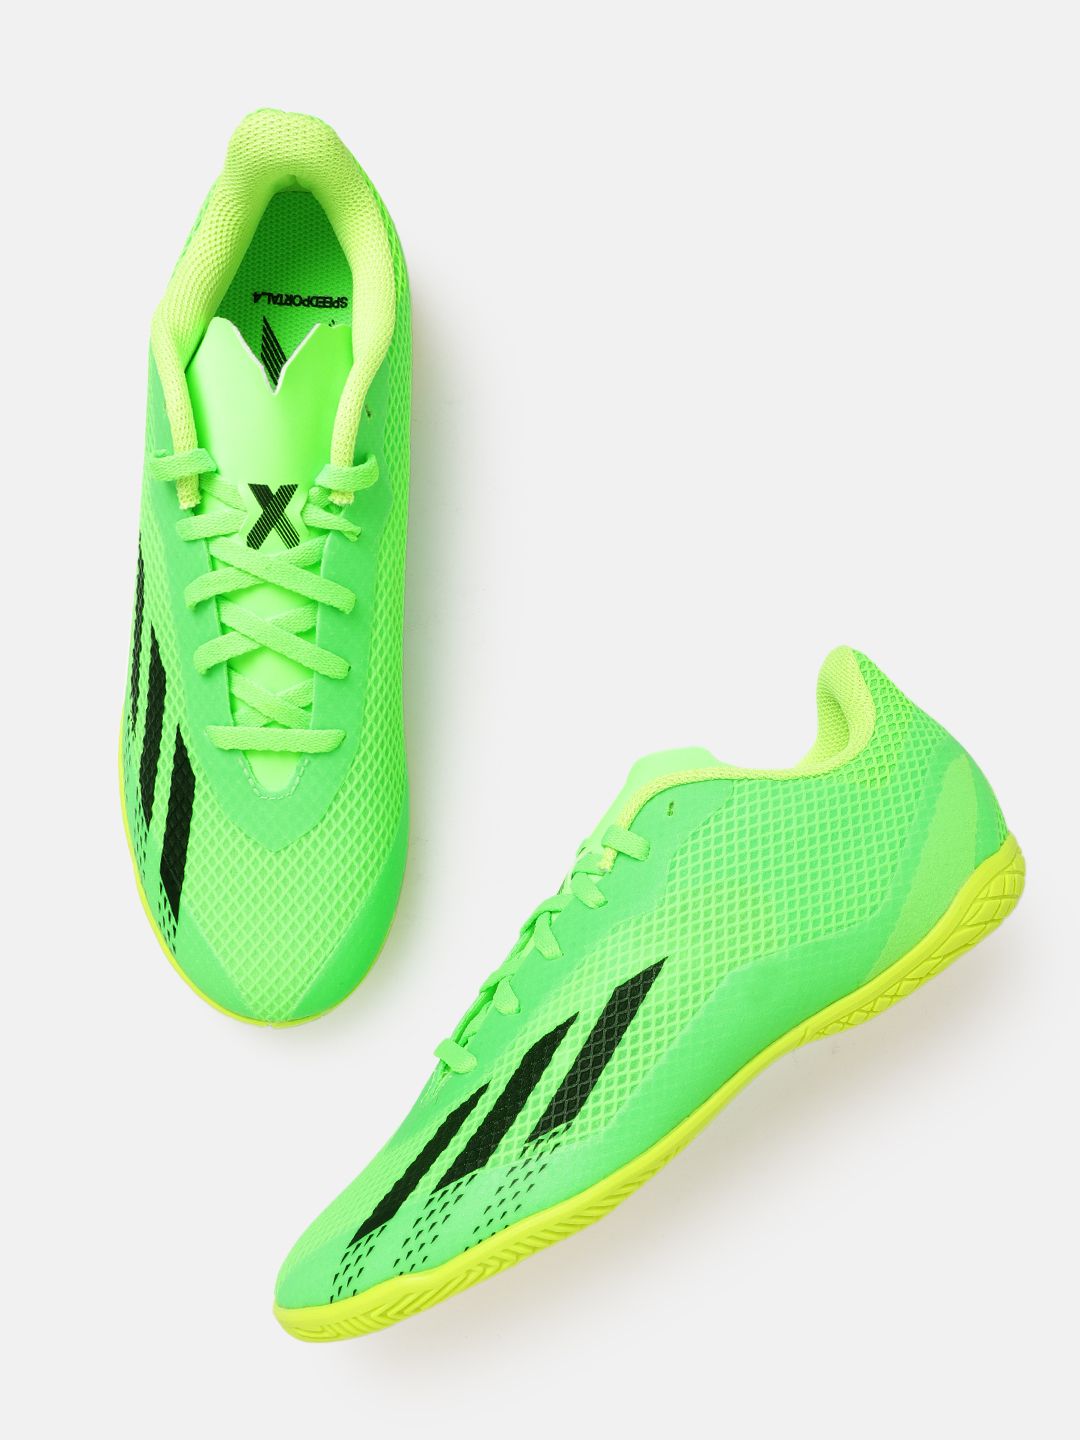 ADIDAS Unisex Lime Green X Speedportal.4 IN Football Shoes Price in India